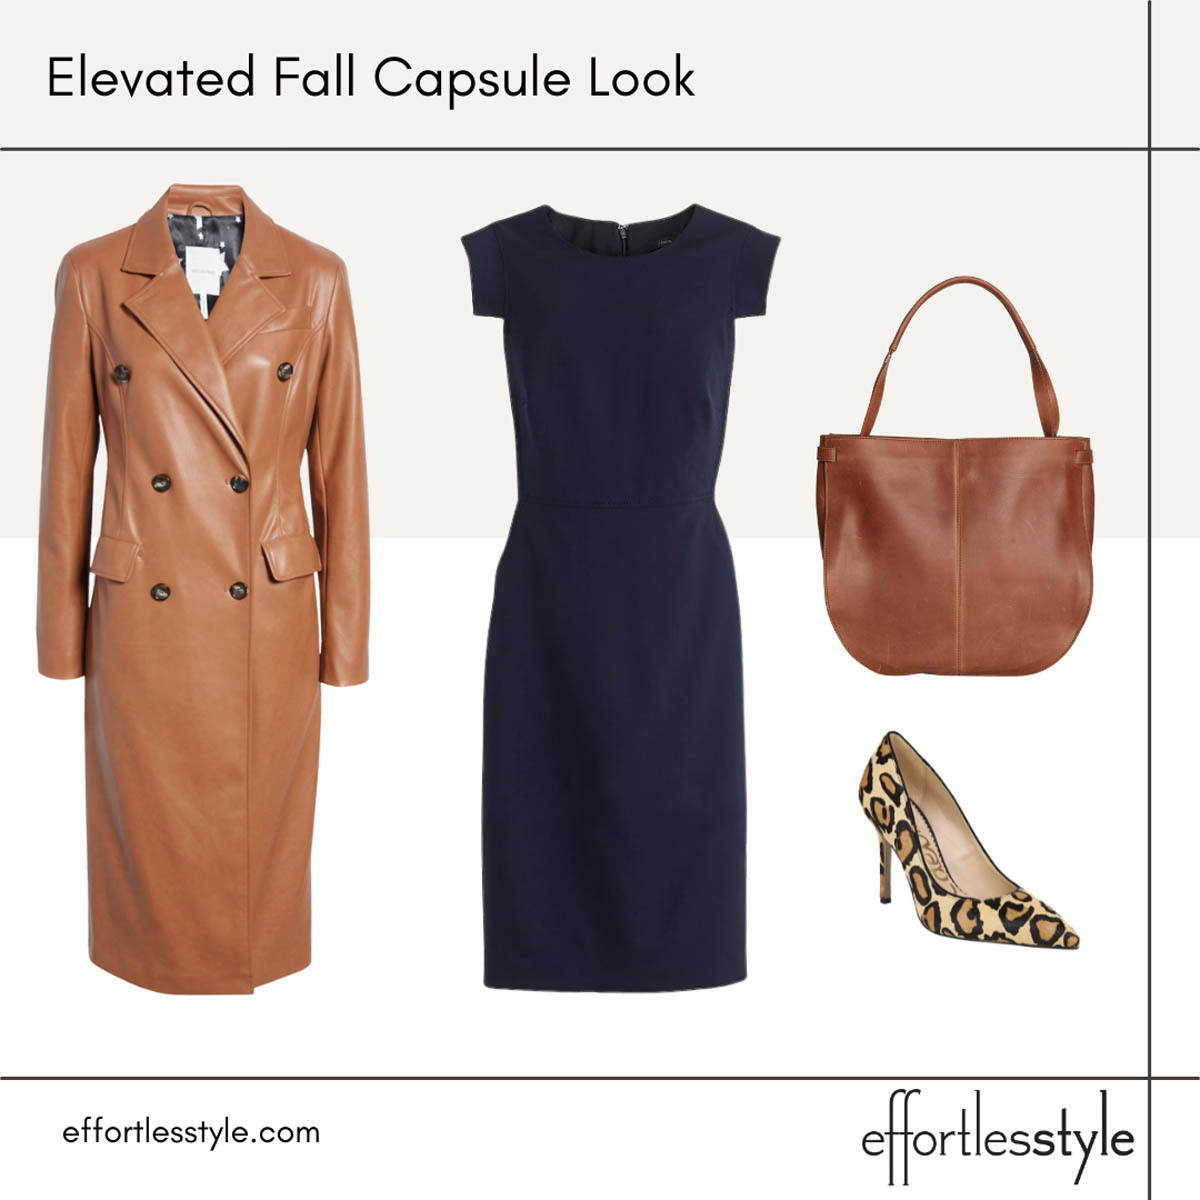 The Faux Leather Trench What to Wear to the Office Trench & Sheath